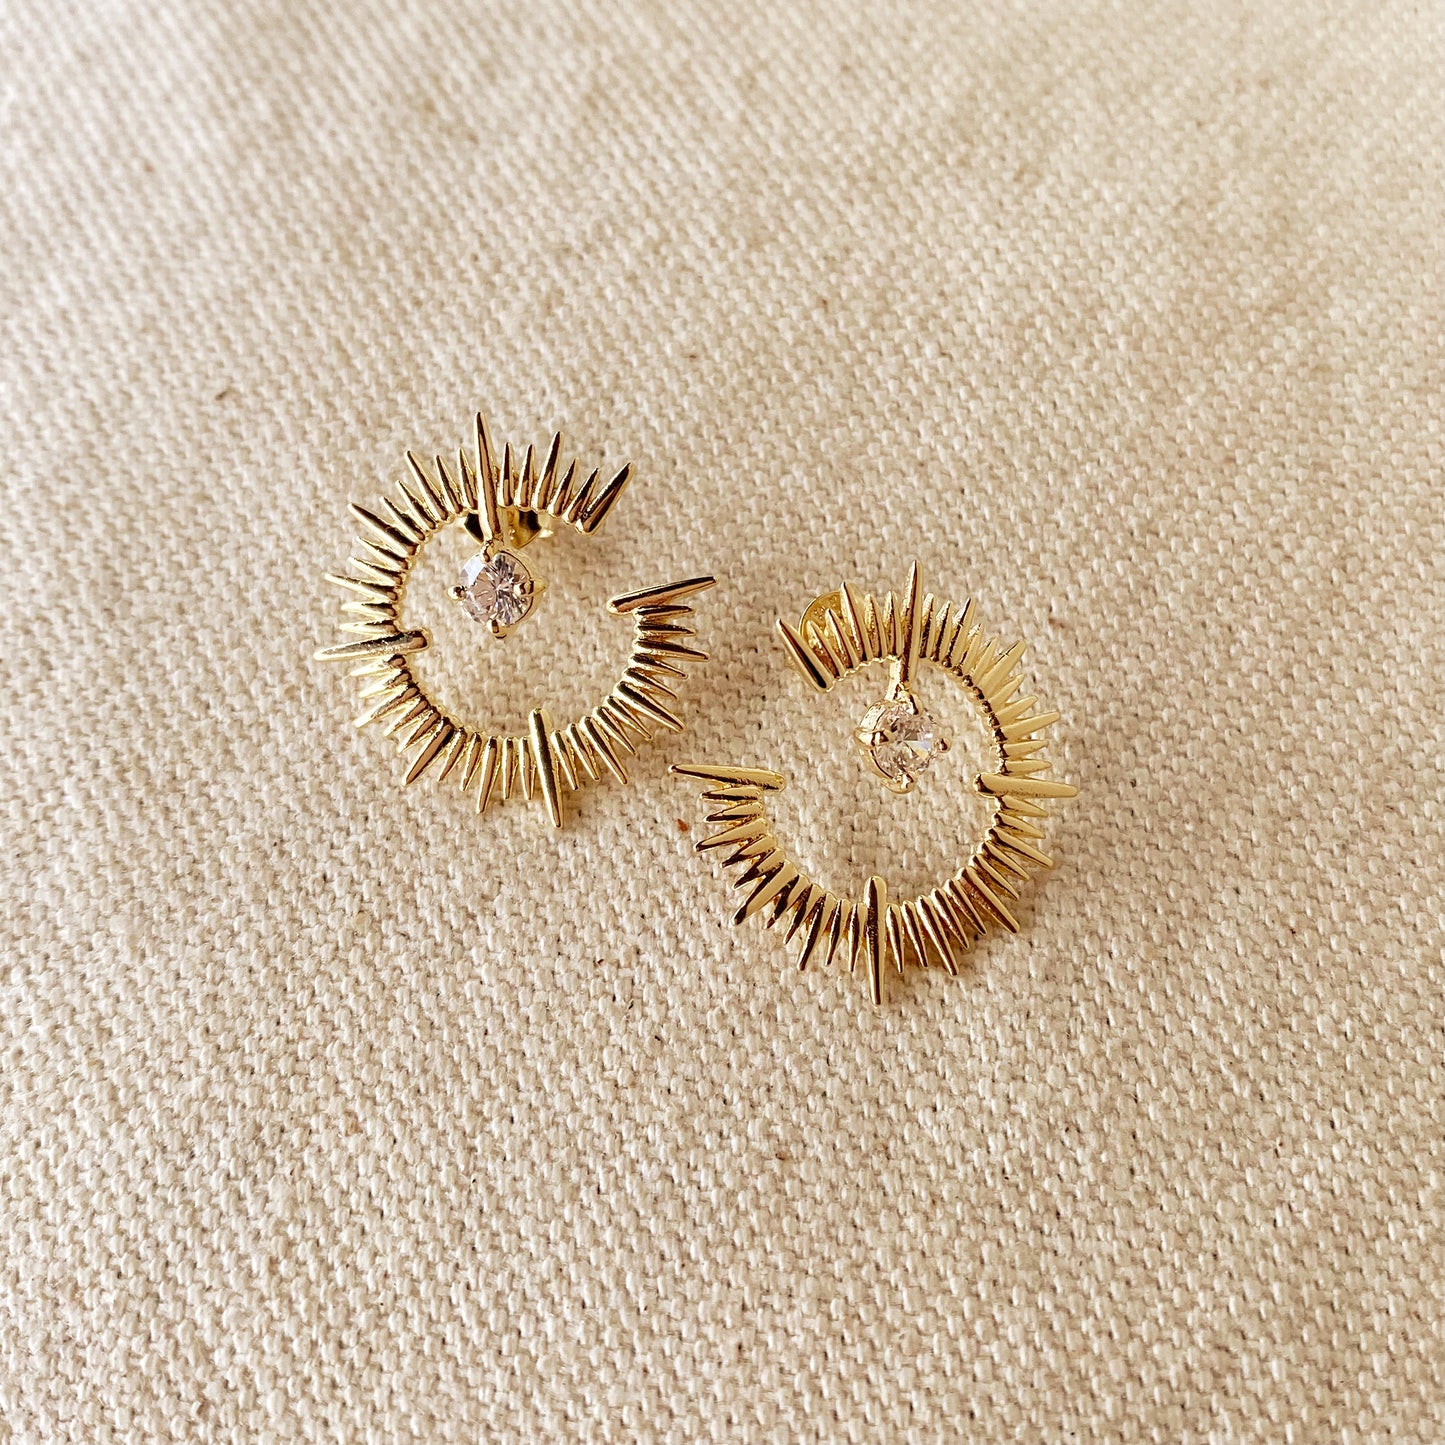 18K Gold Filled Spiked Stud With CZ